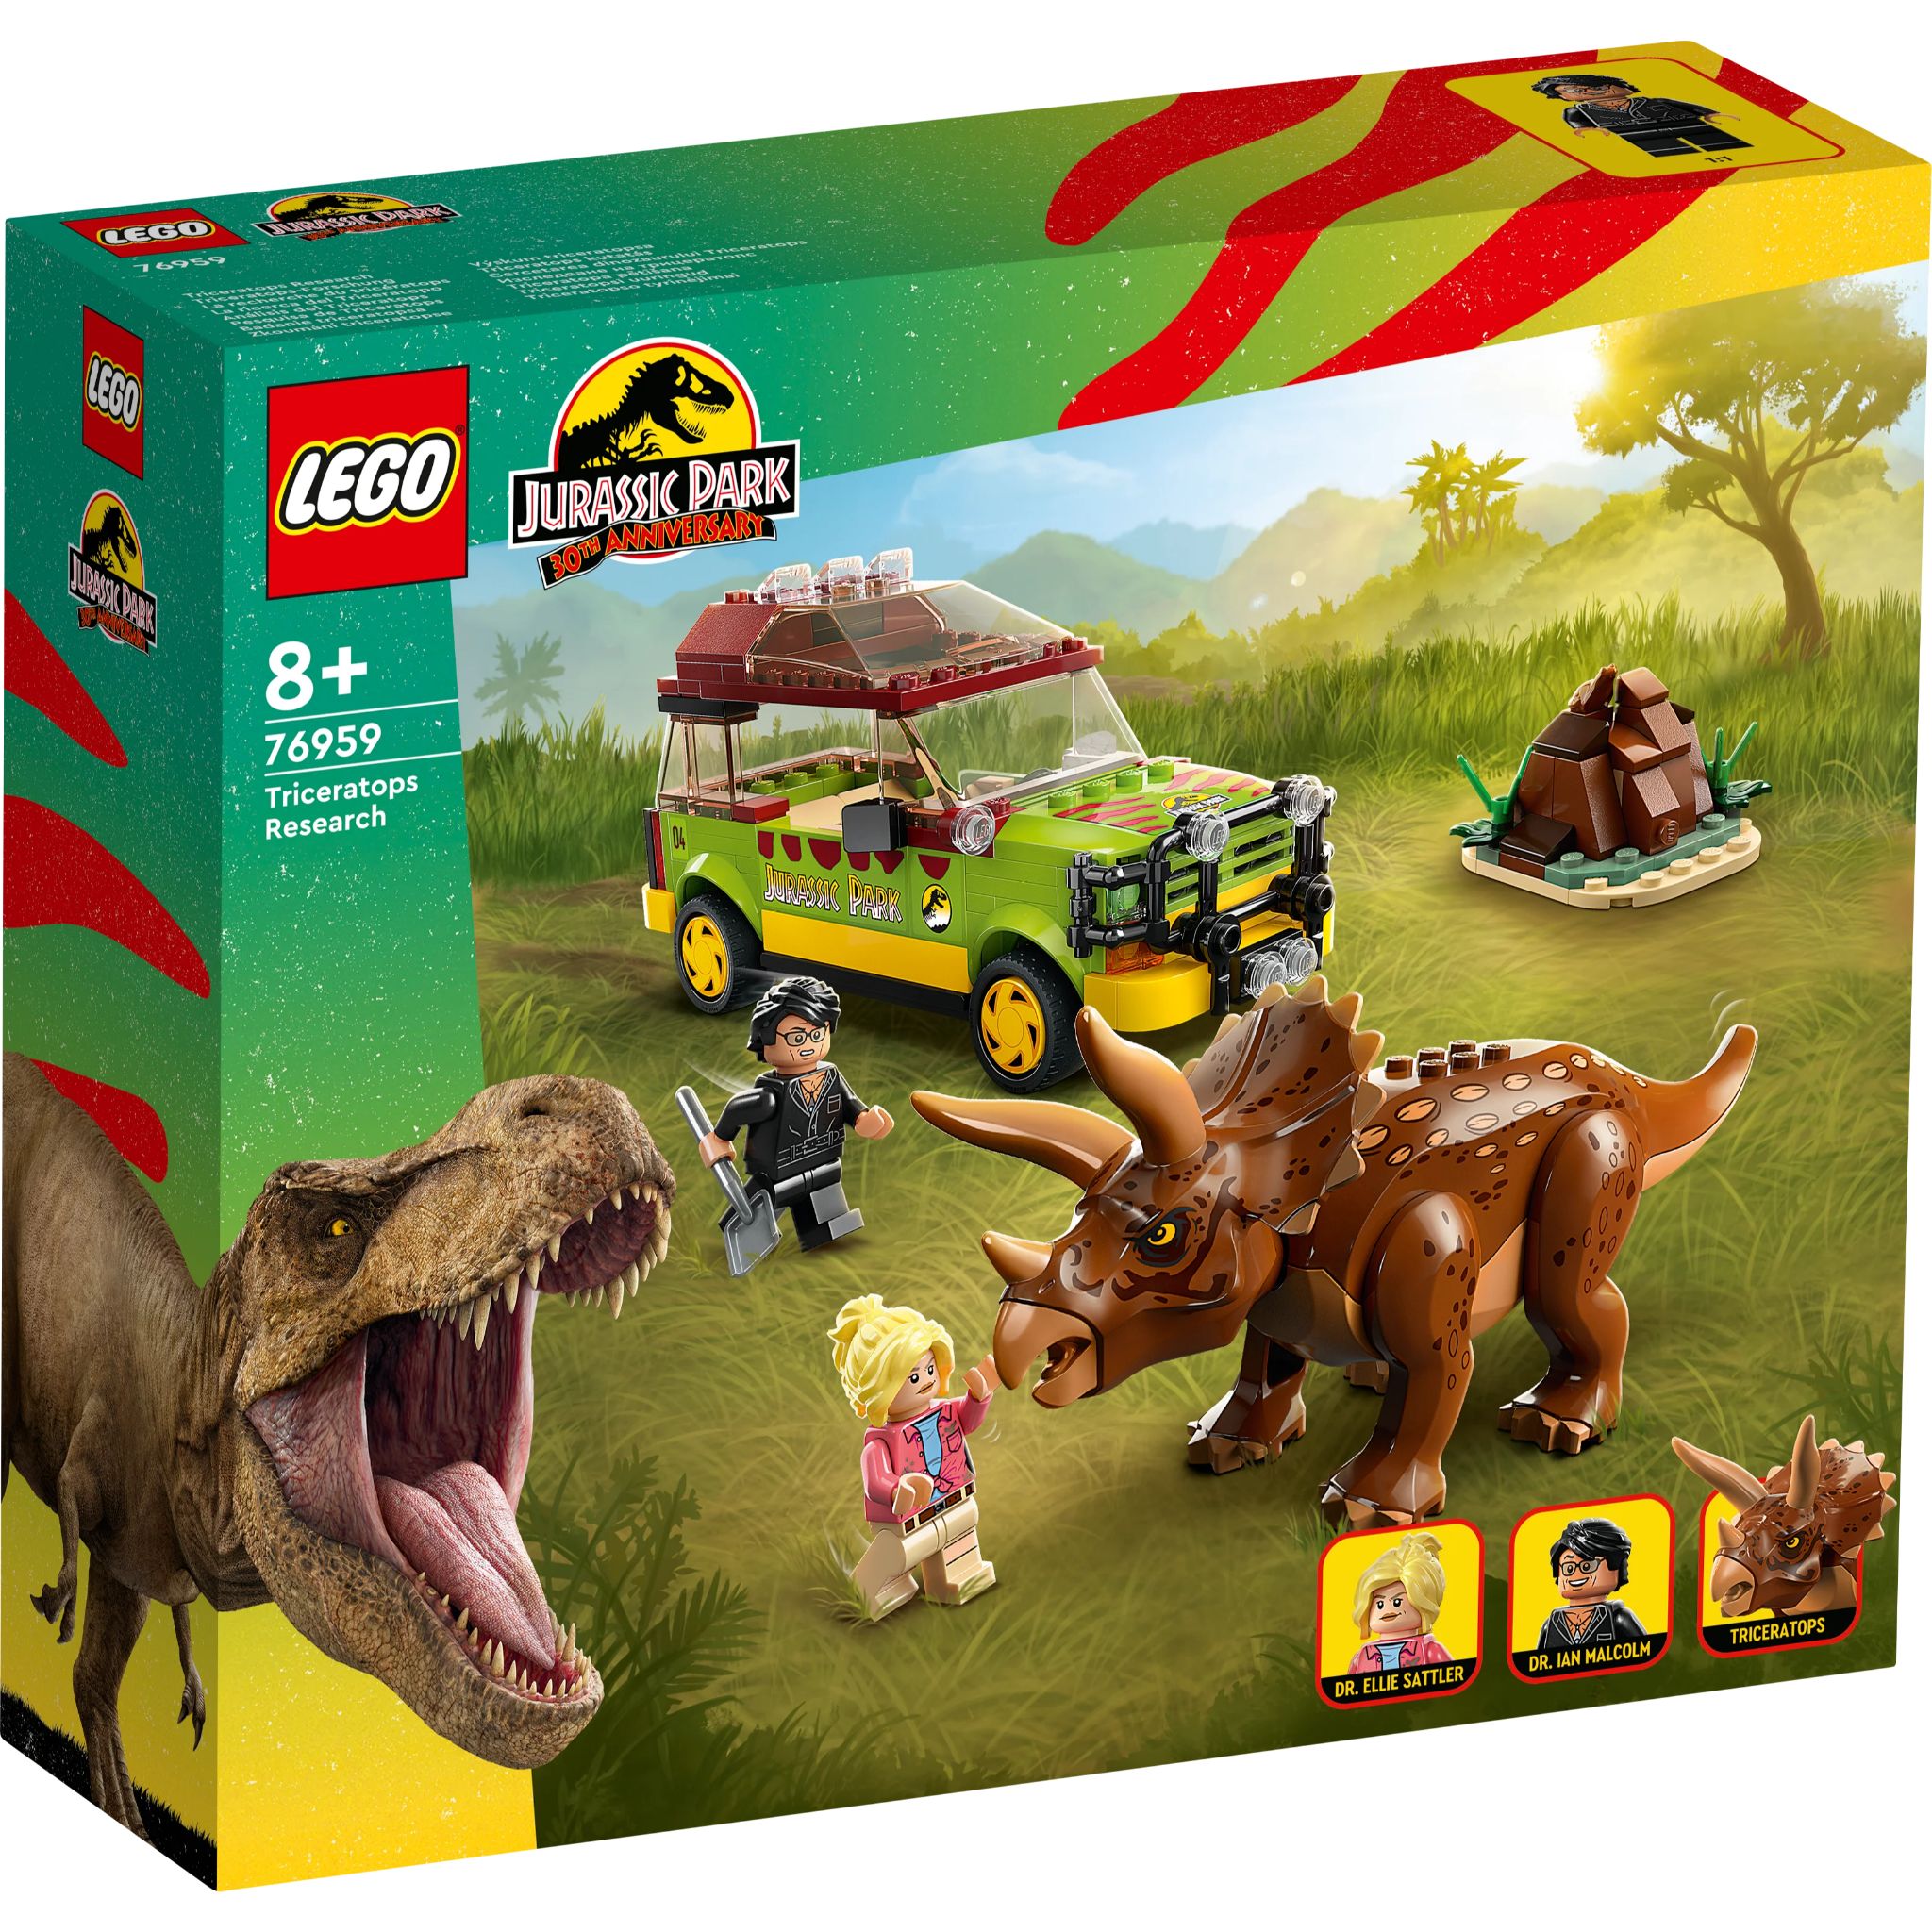 LEGO Jurassic World: Triceratops Research (76959)